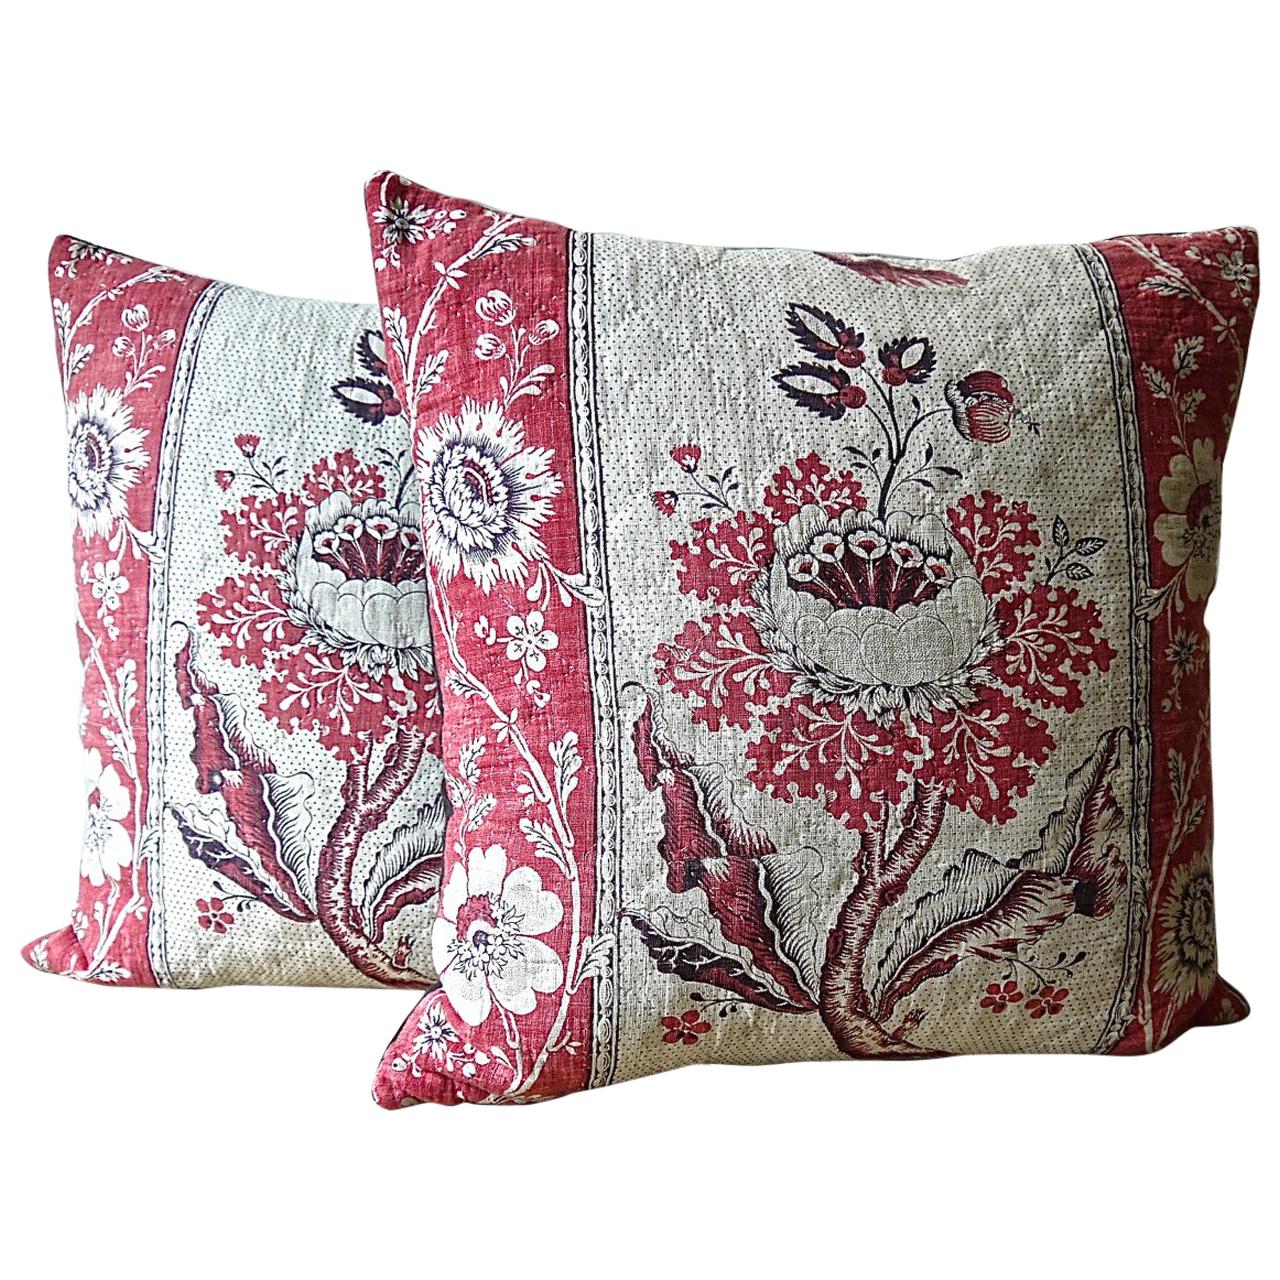 Pair of Blockprinted Stylised Flower Pillows, French, 18th Century For Sale